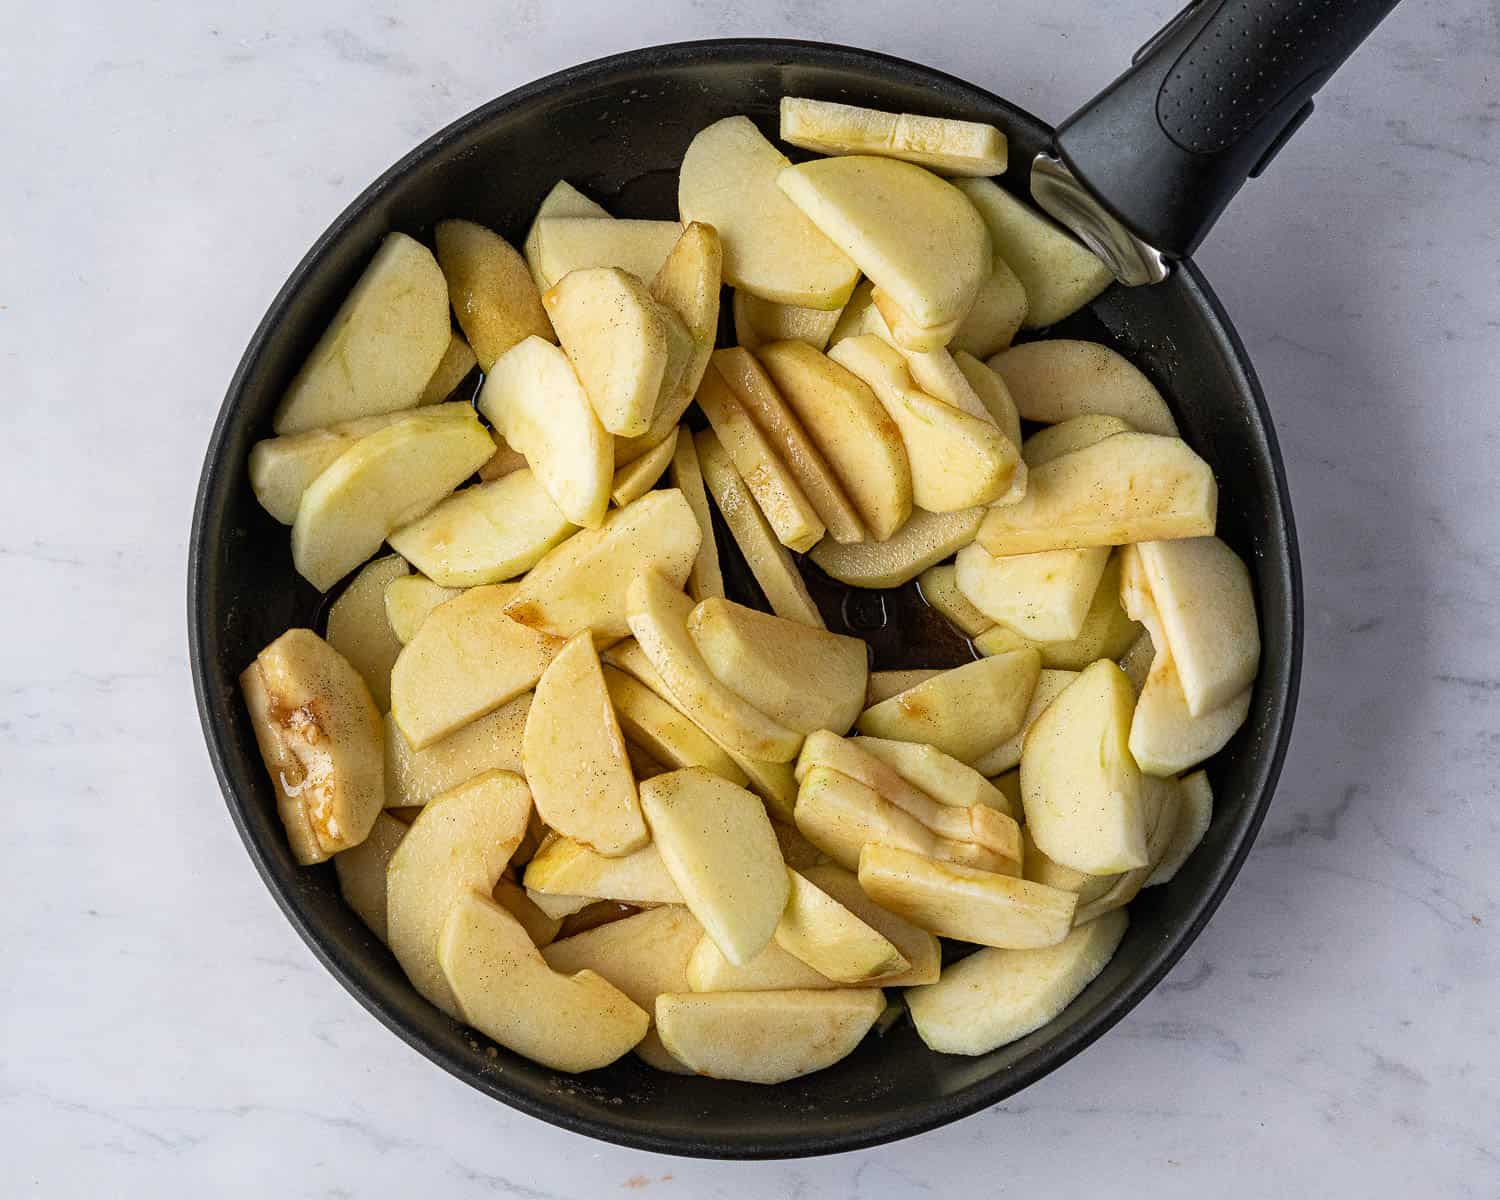 Step 1, the peeled, cored and sliced apples in a pan.